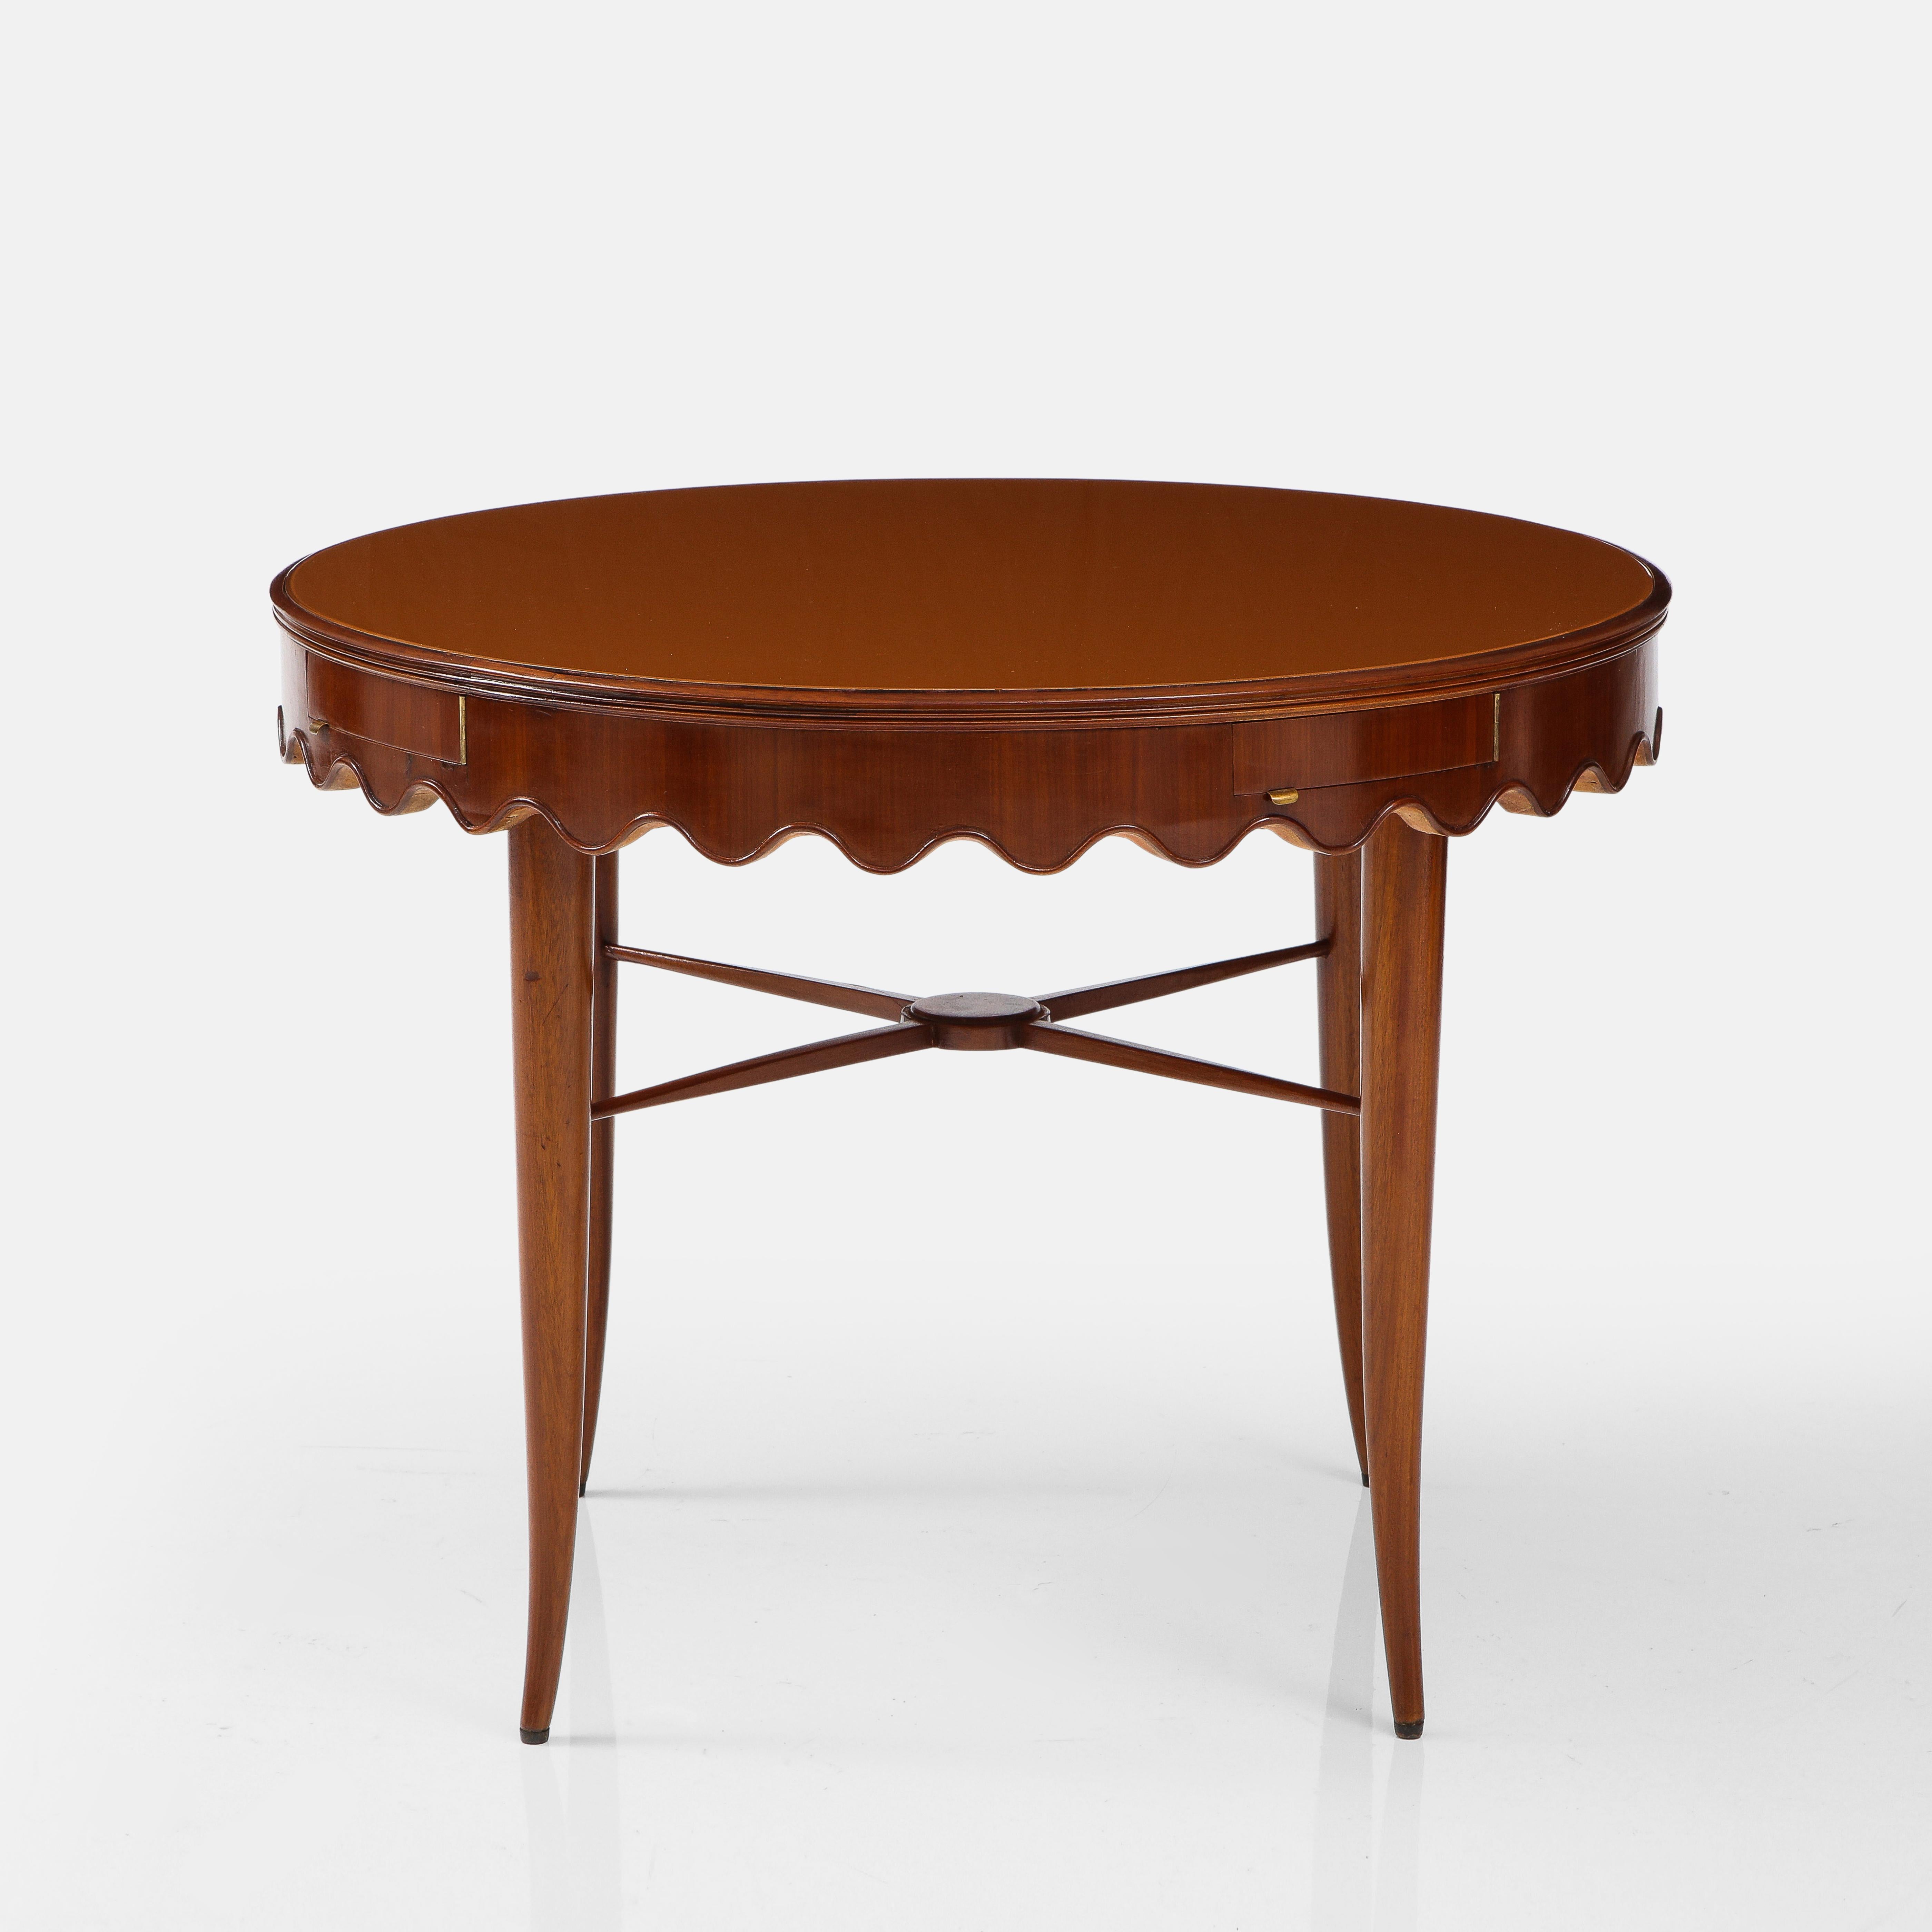 Rare and exquisite Paolo Buffa center or game table in walnut composed of inset reverse painted or eglomisé glass top with scalloped apron, four small drawers, stretcher with central medallion, and slightly splayed saber legs, Italy, 1940s. This